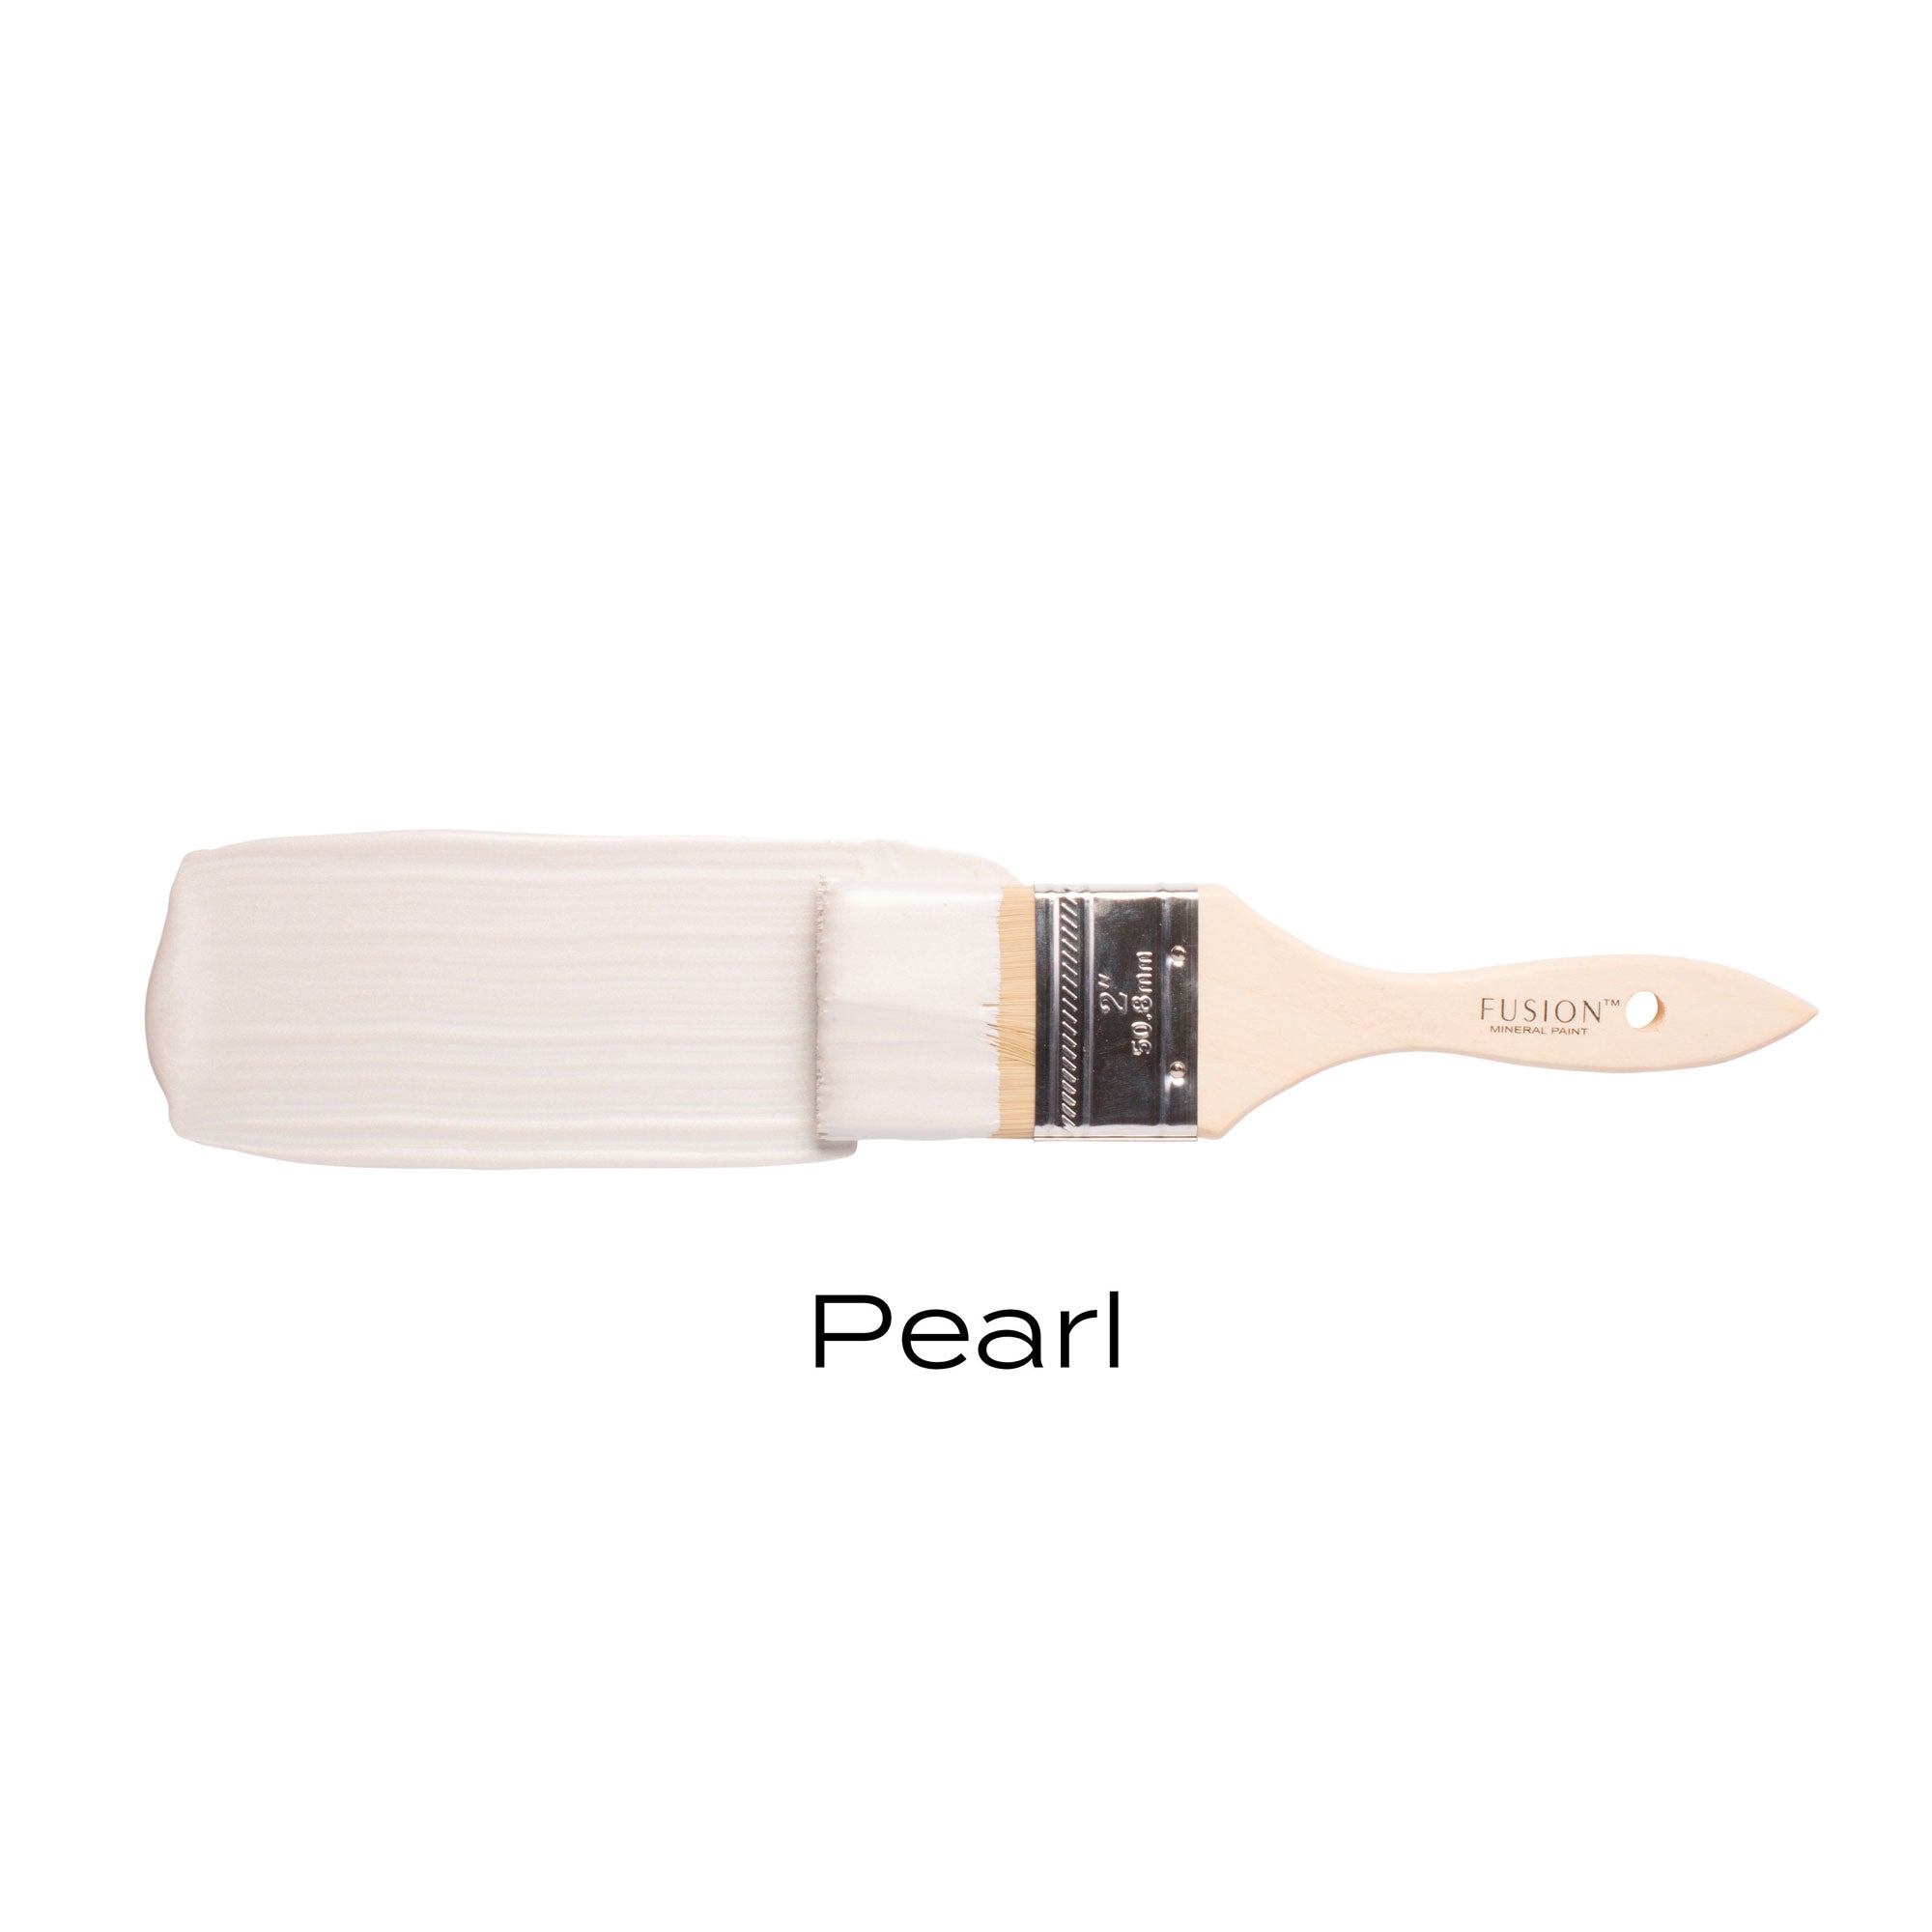 Fusion_Mineral_Paint_Pearl_Brush.jpg